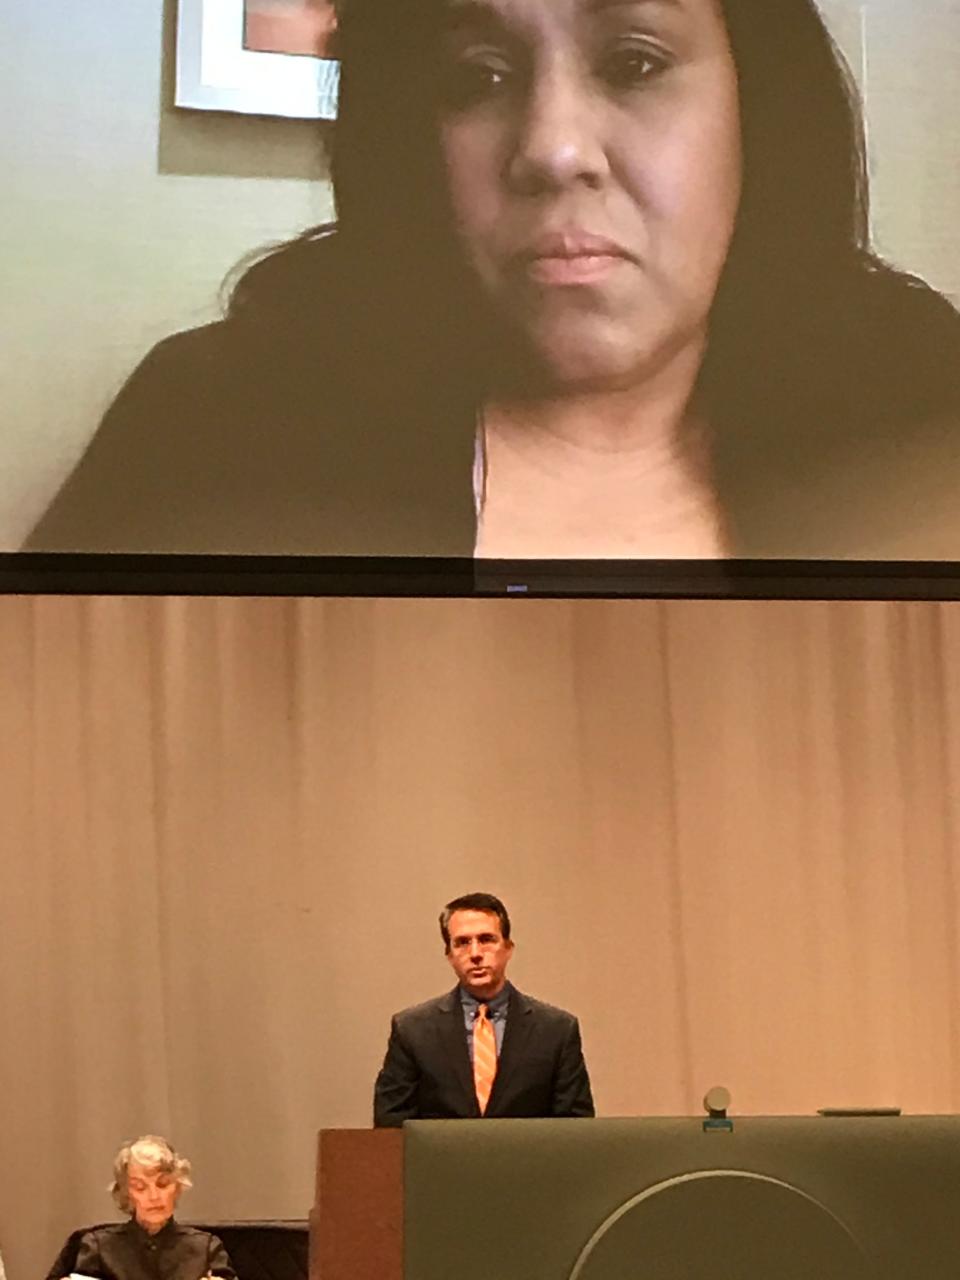 At a meeting at Snead State Community College Tuesday, National Compassion Fund Executive Director Jeffery Dion spoke to those in the auditorium as others participate via Zoom about the Albertville Survivors Fund for victims of the June 15 shootings at the Mueller plant.